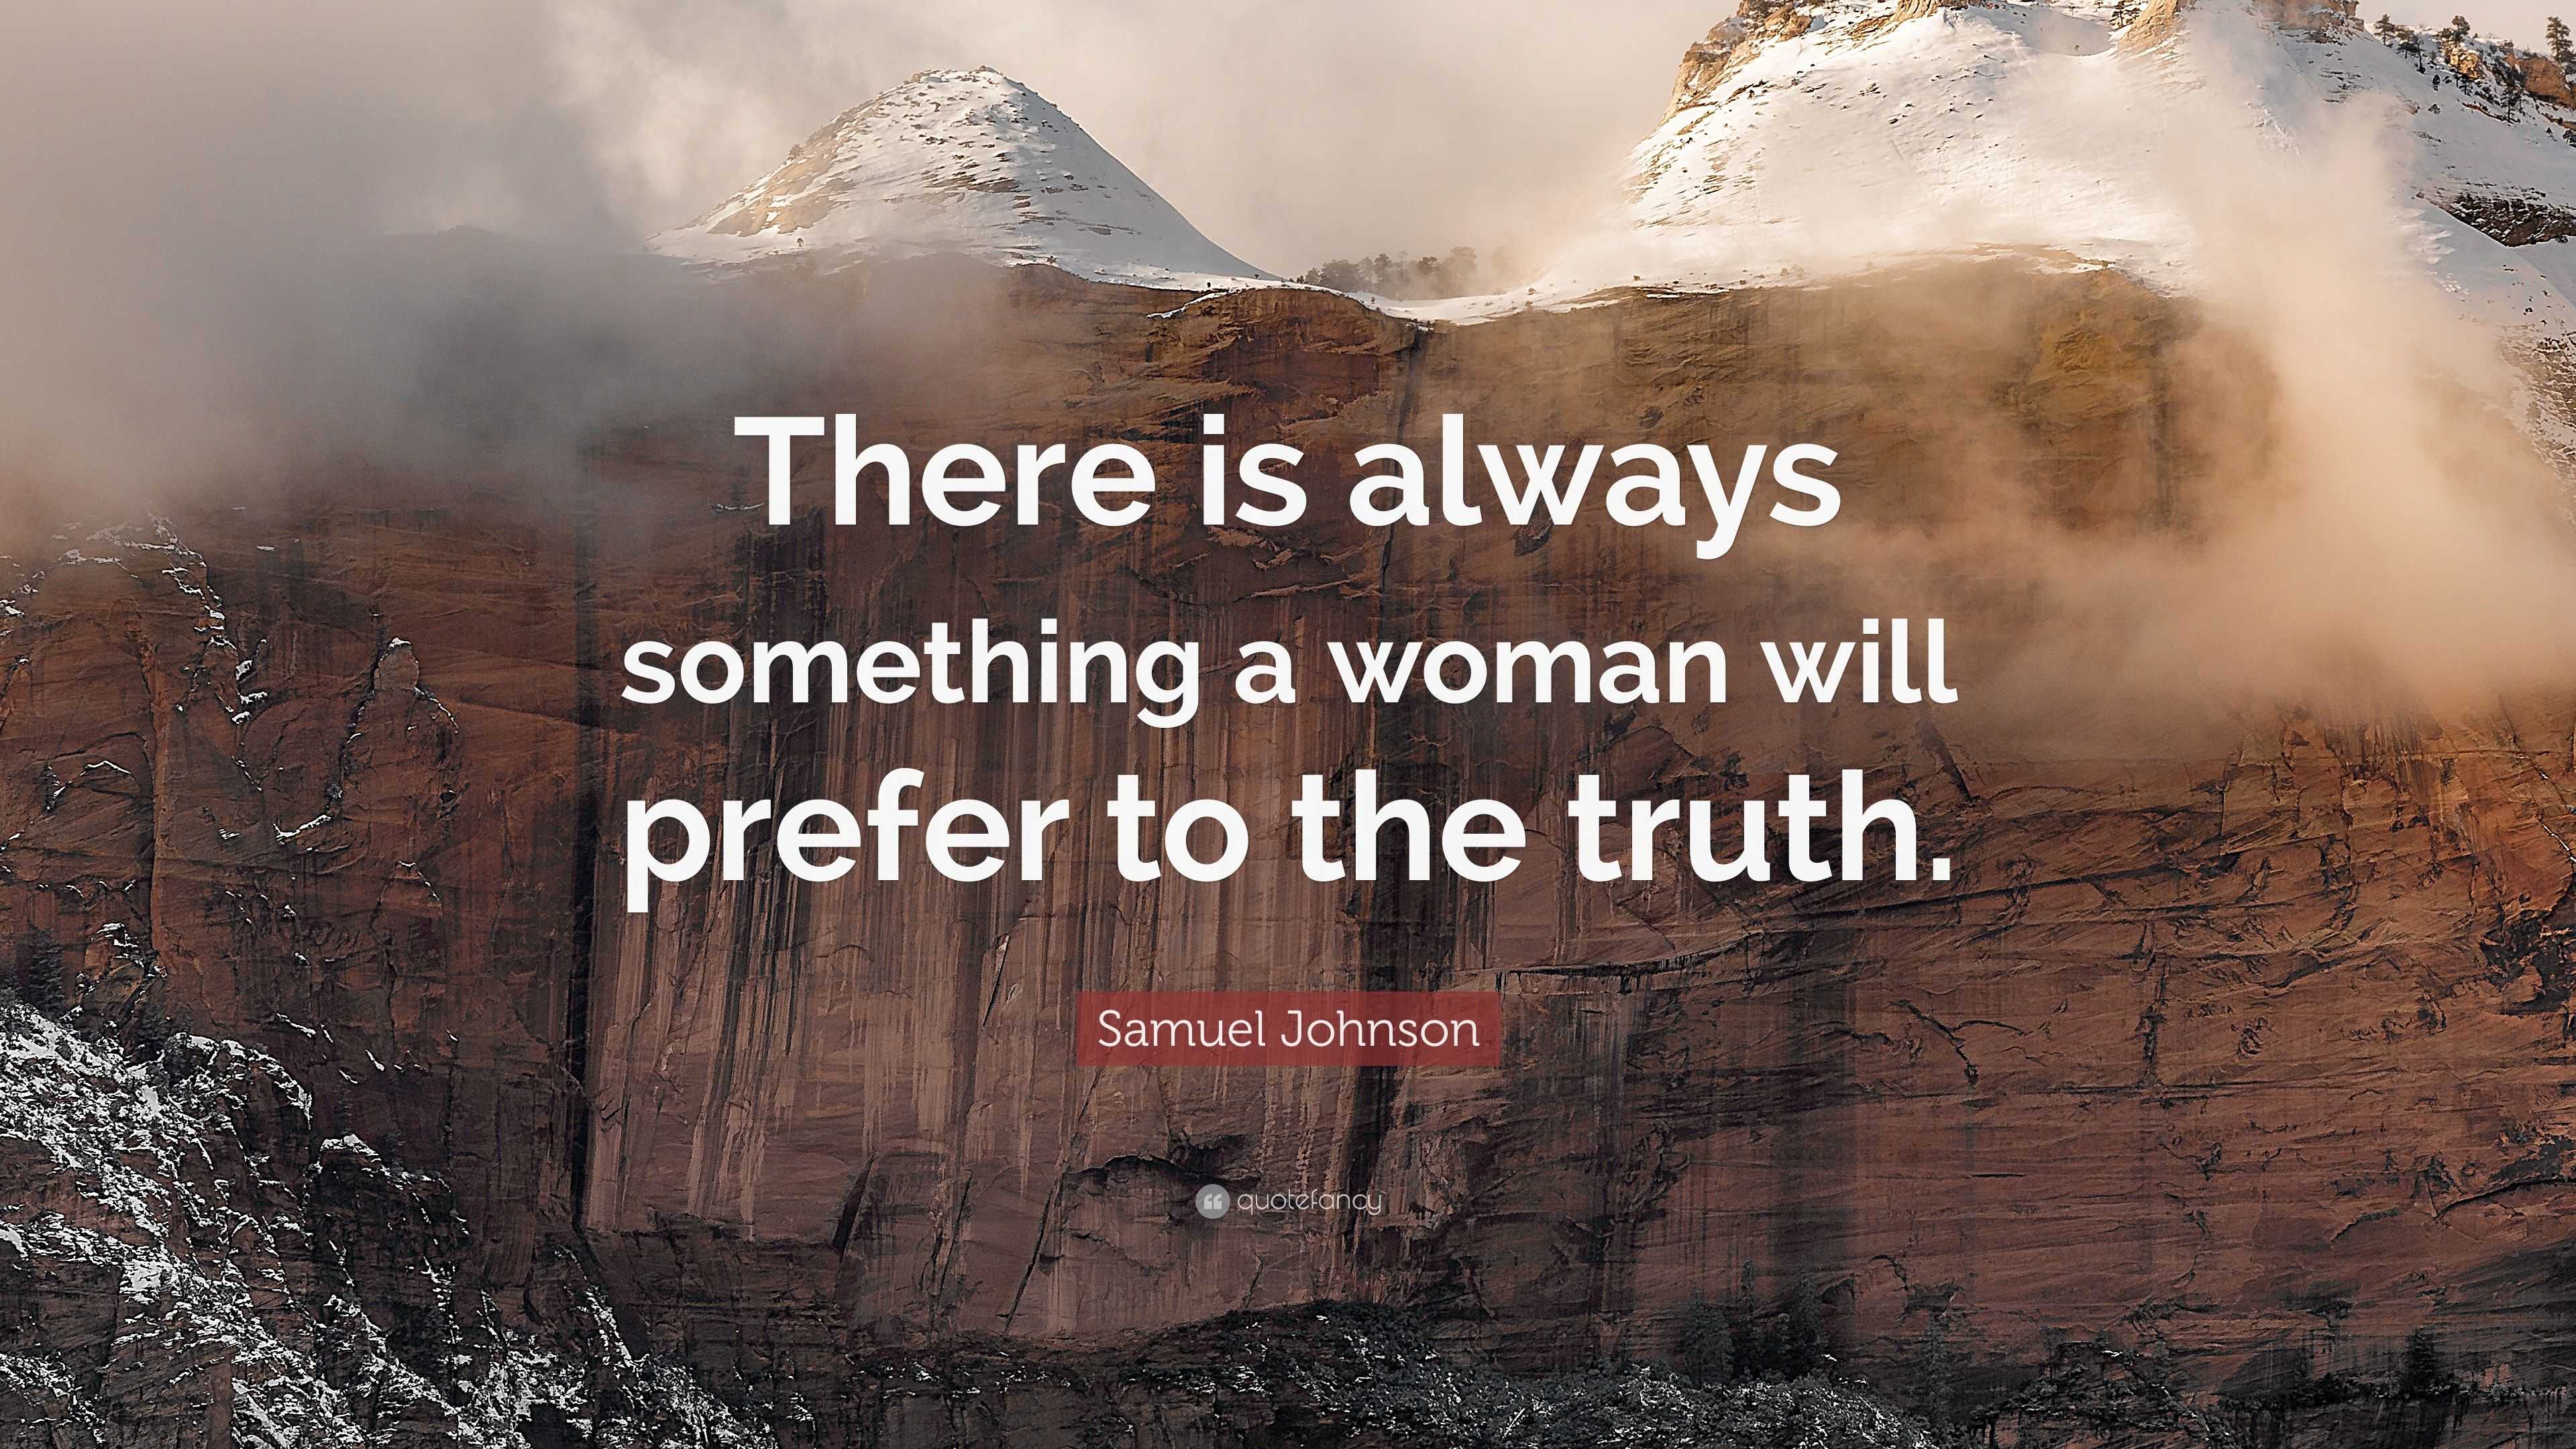 Samuel Johnson Quote: “There is always something a woman will prefer to ...